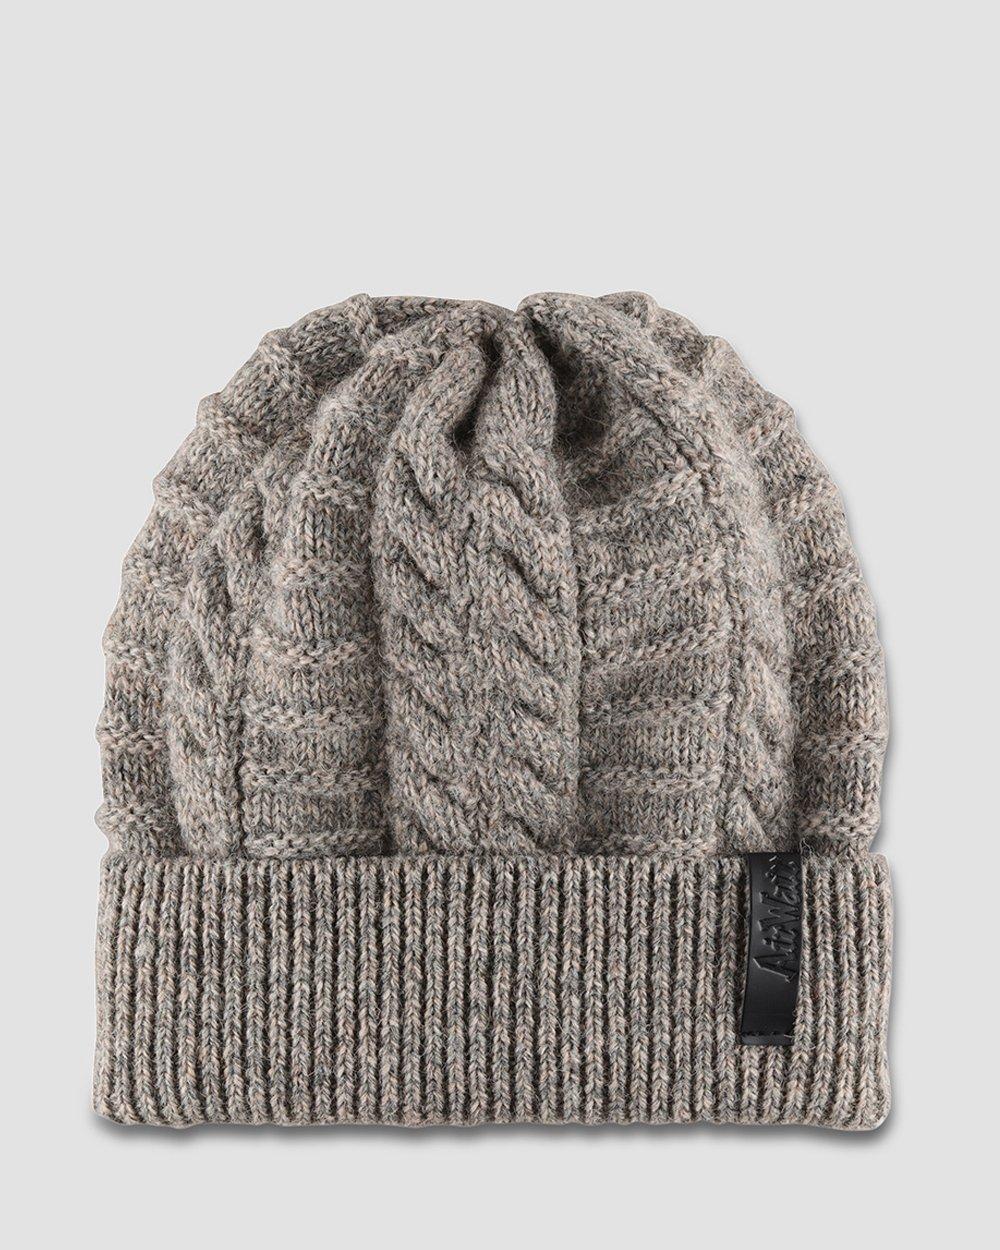 CABLE KNIT BEANIE Dr. Martens